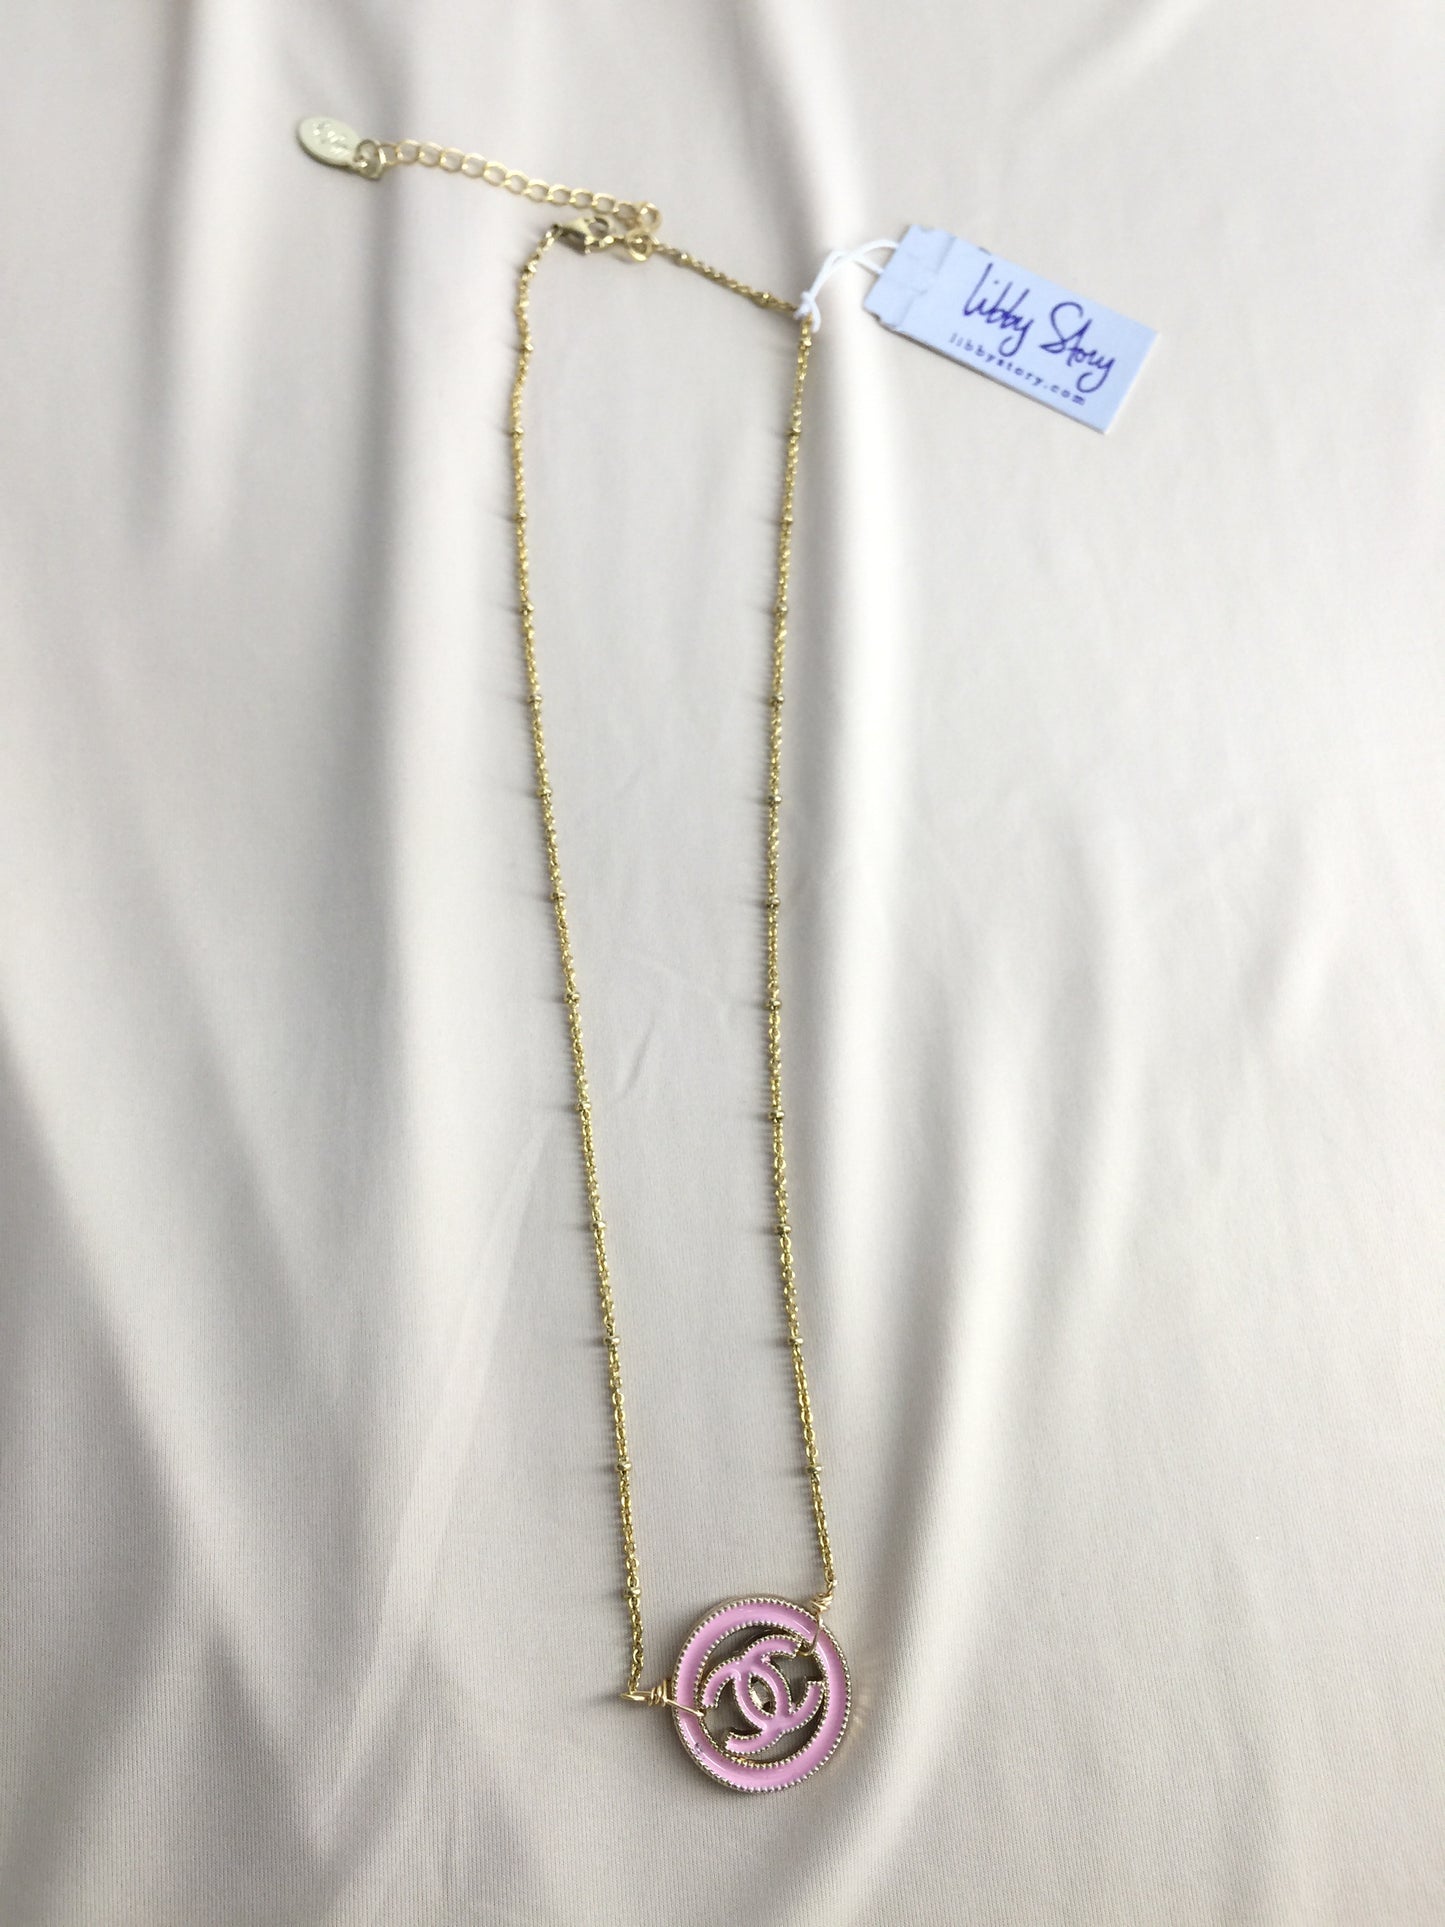 LS Upcycled Pink CC Necklace